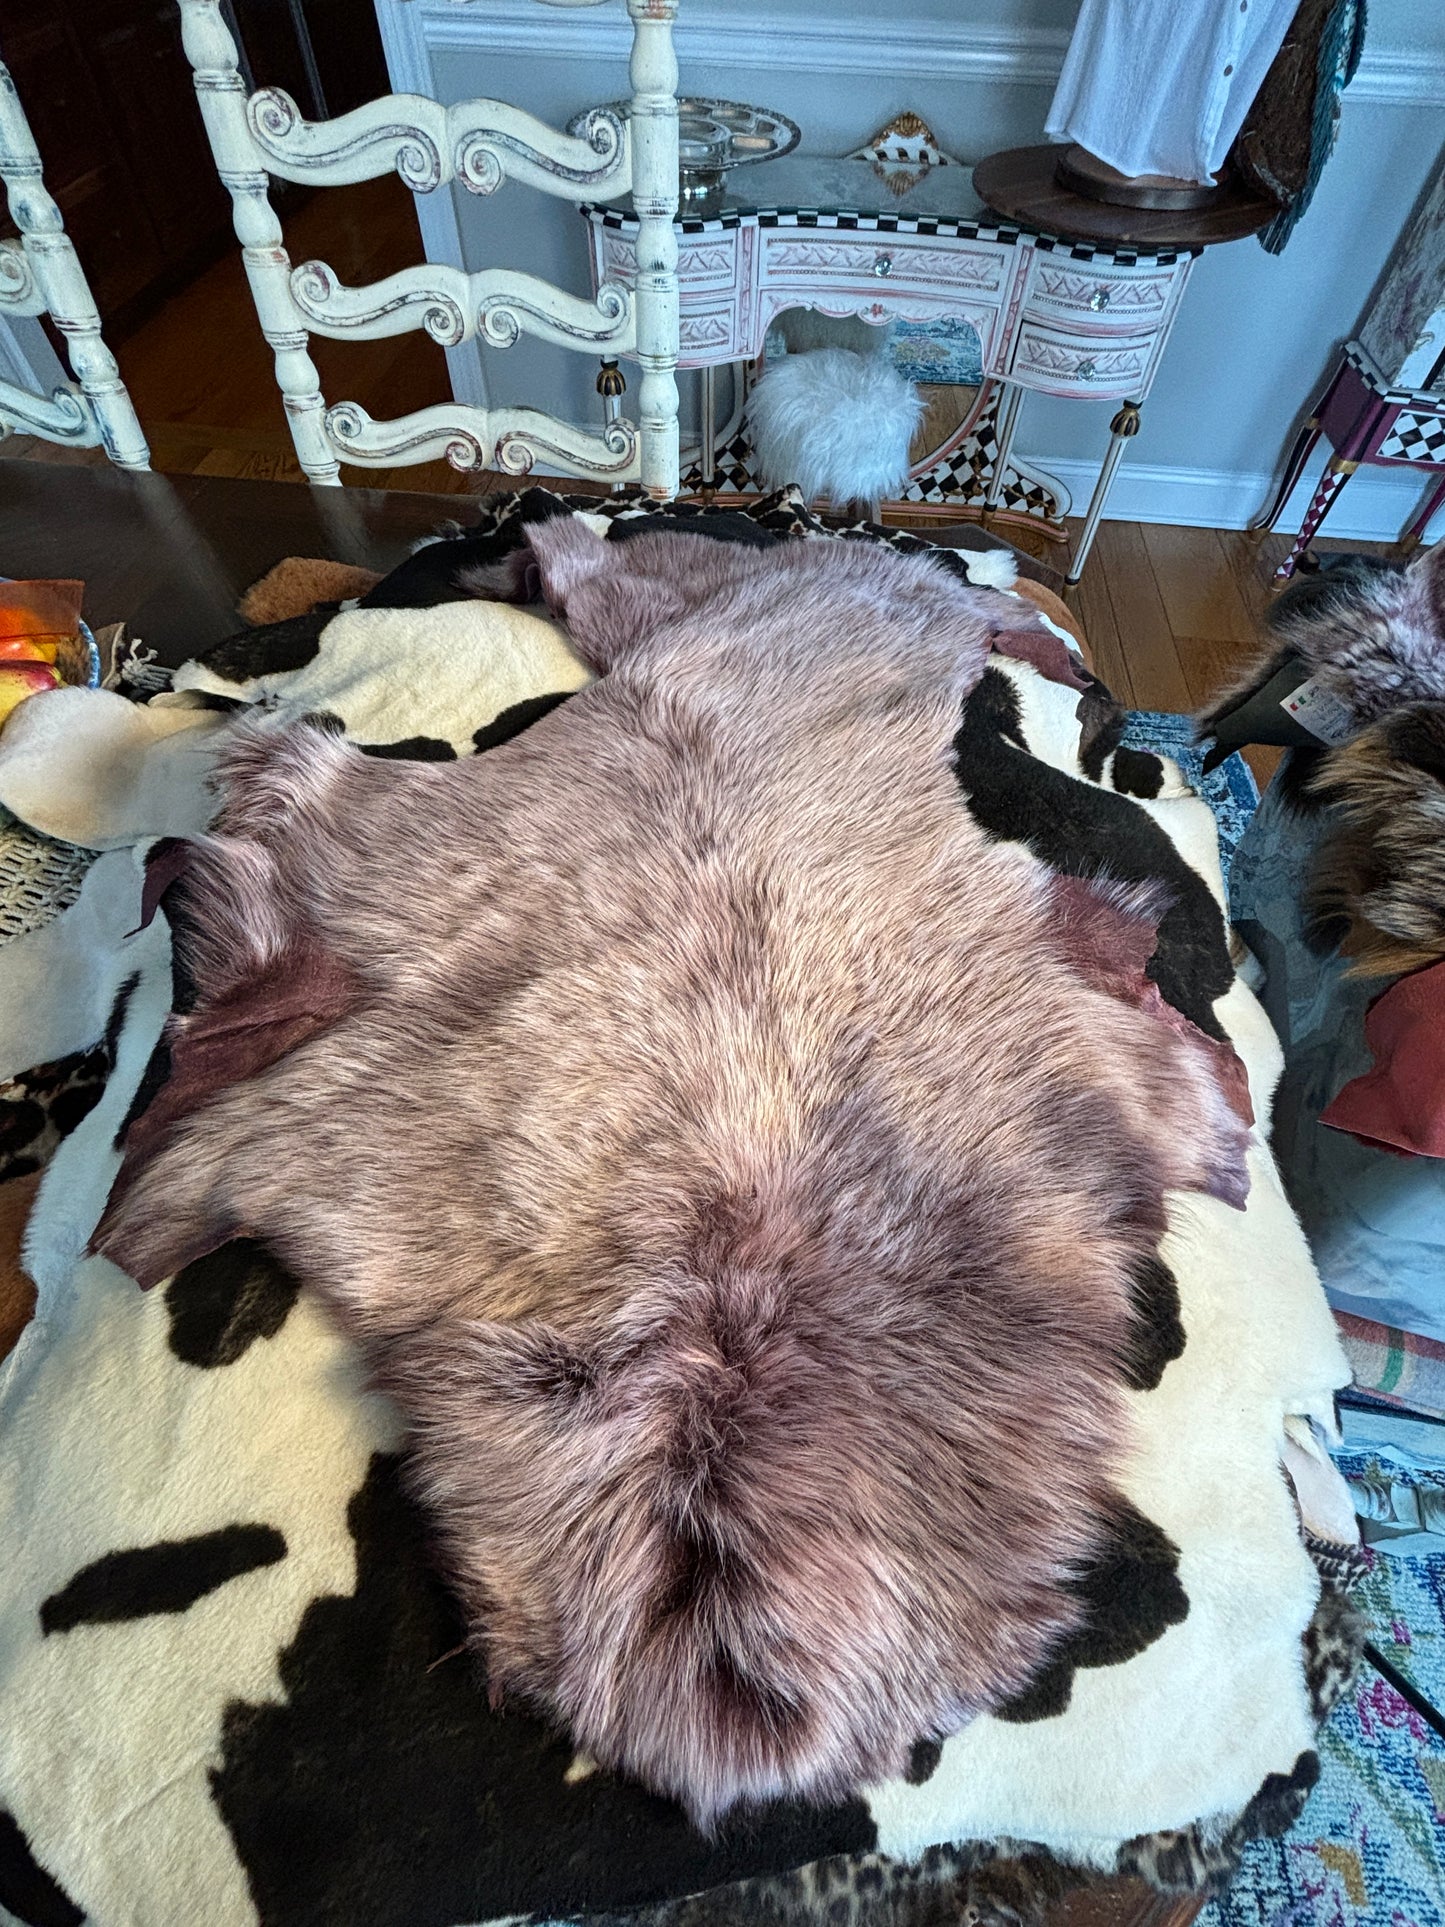 Listing 2 Shearling Merino Sheep Pelt, Sheepskin, Upholstery, Woolly, Leather Suede, Upcycling, DIY Projects, Choose Color, Genuine Hide Fur